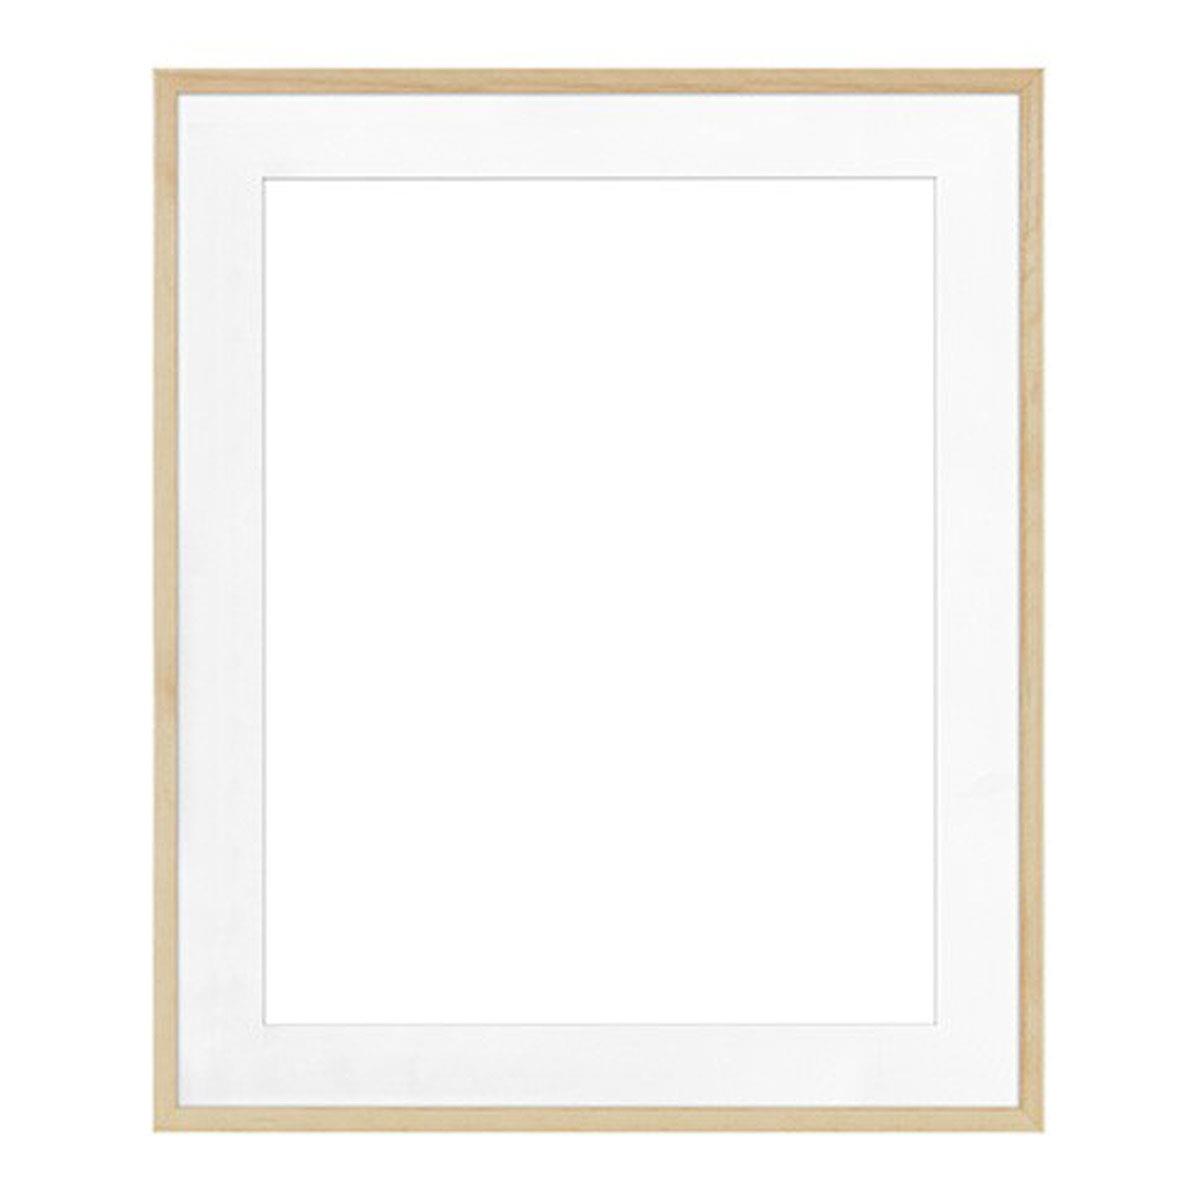 Image of Framatic Woodworks 8x10in Natural Blonde Frame for5x7in